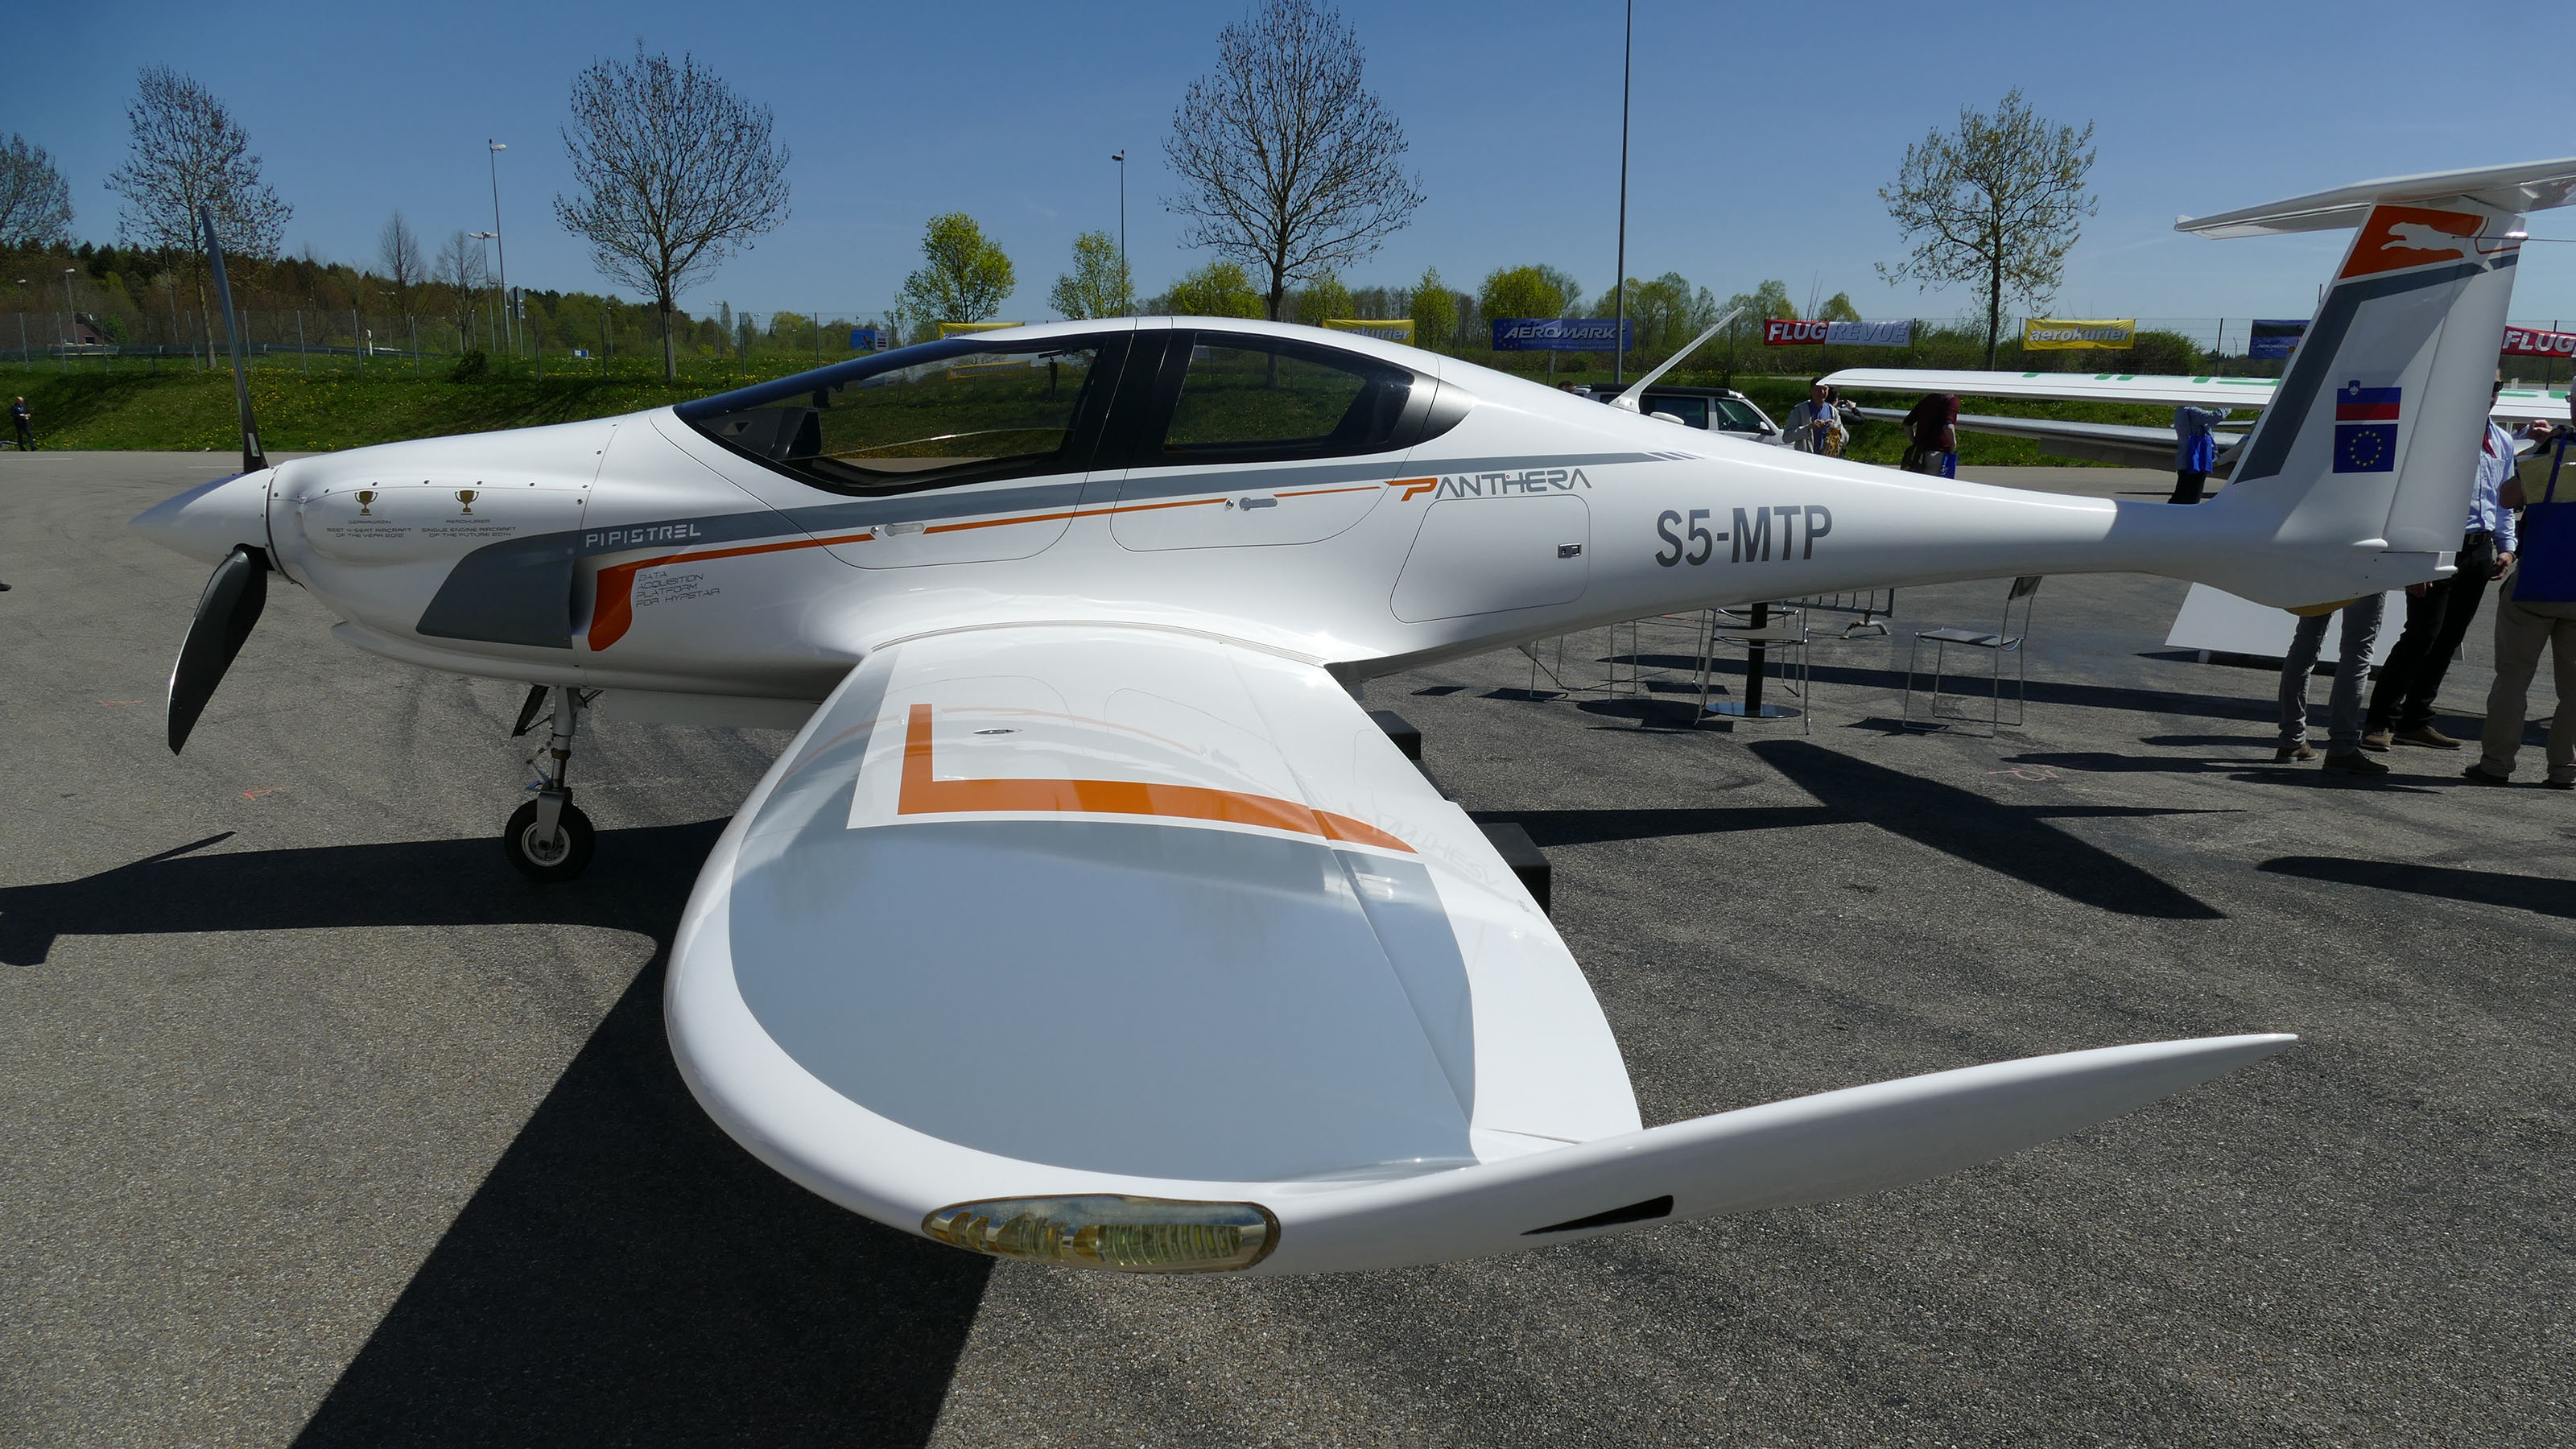 An early Pipistrel Panthera model, powered by a Lycoming IO-390 engine, is on display. Photo by Tom Horne.